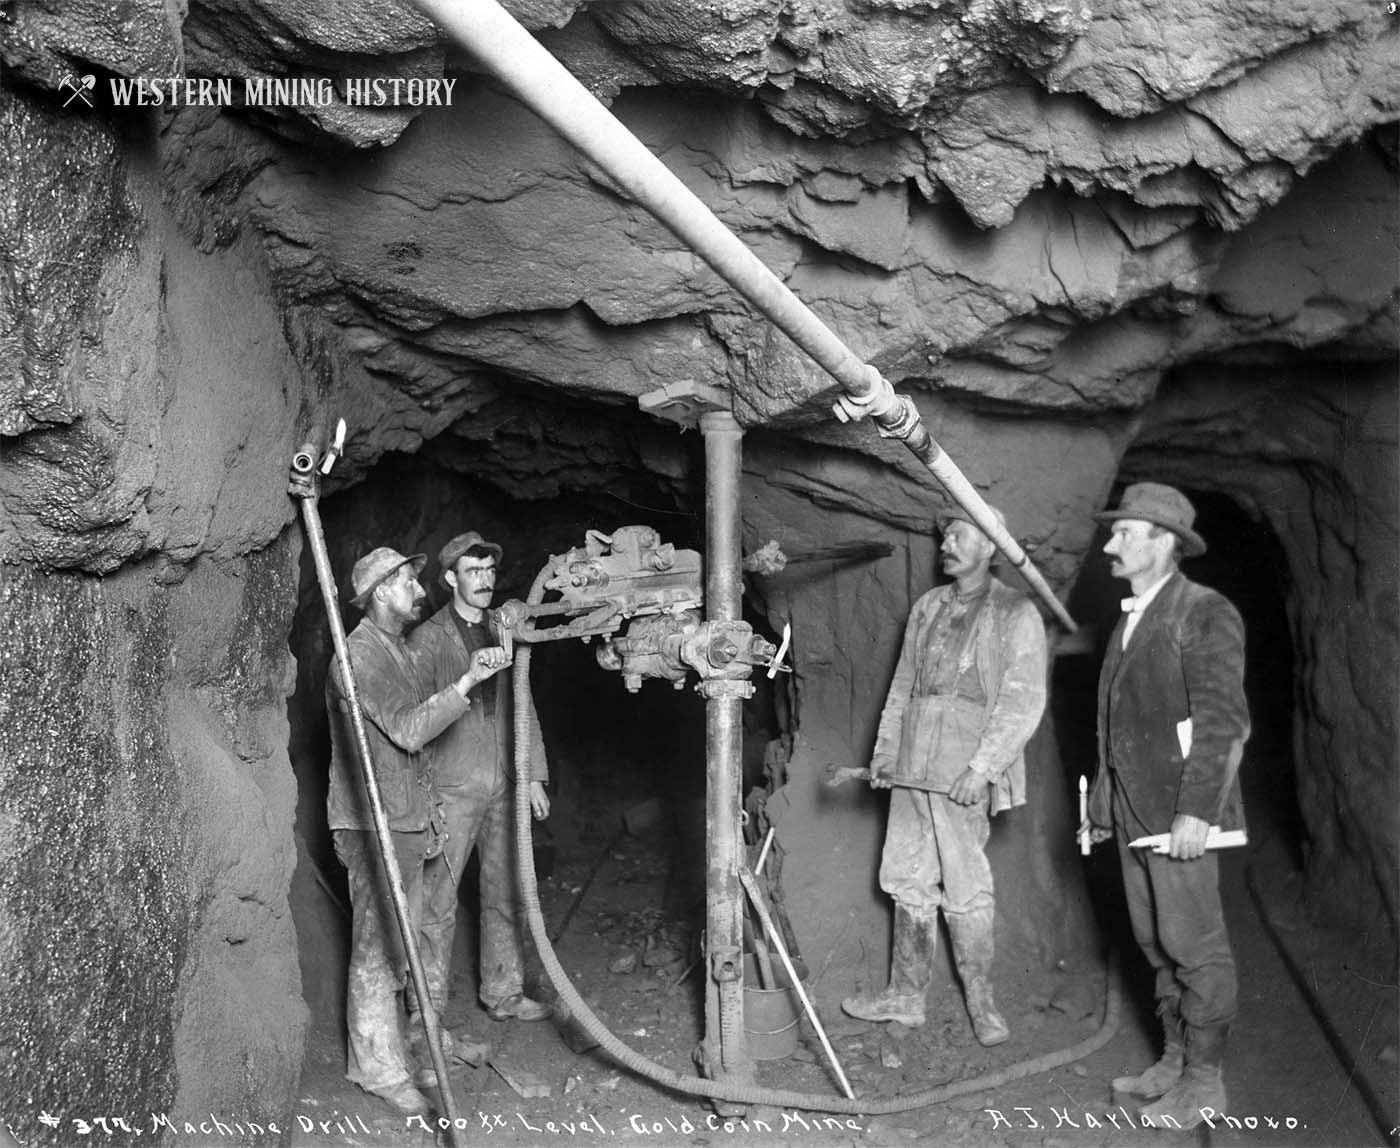 Drilling in the Gold Coin Mine - Victor Colorado 